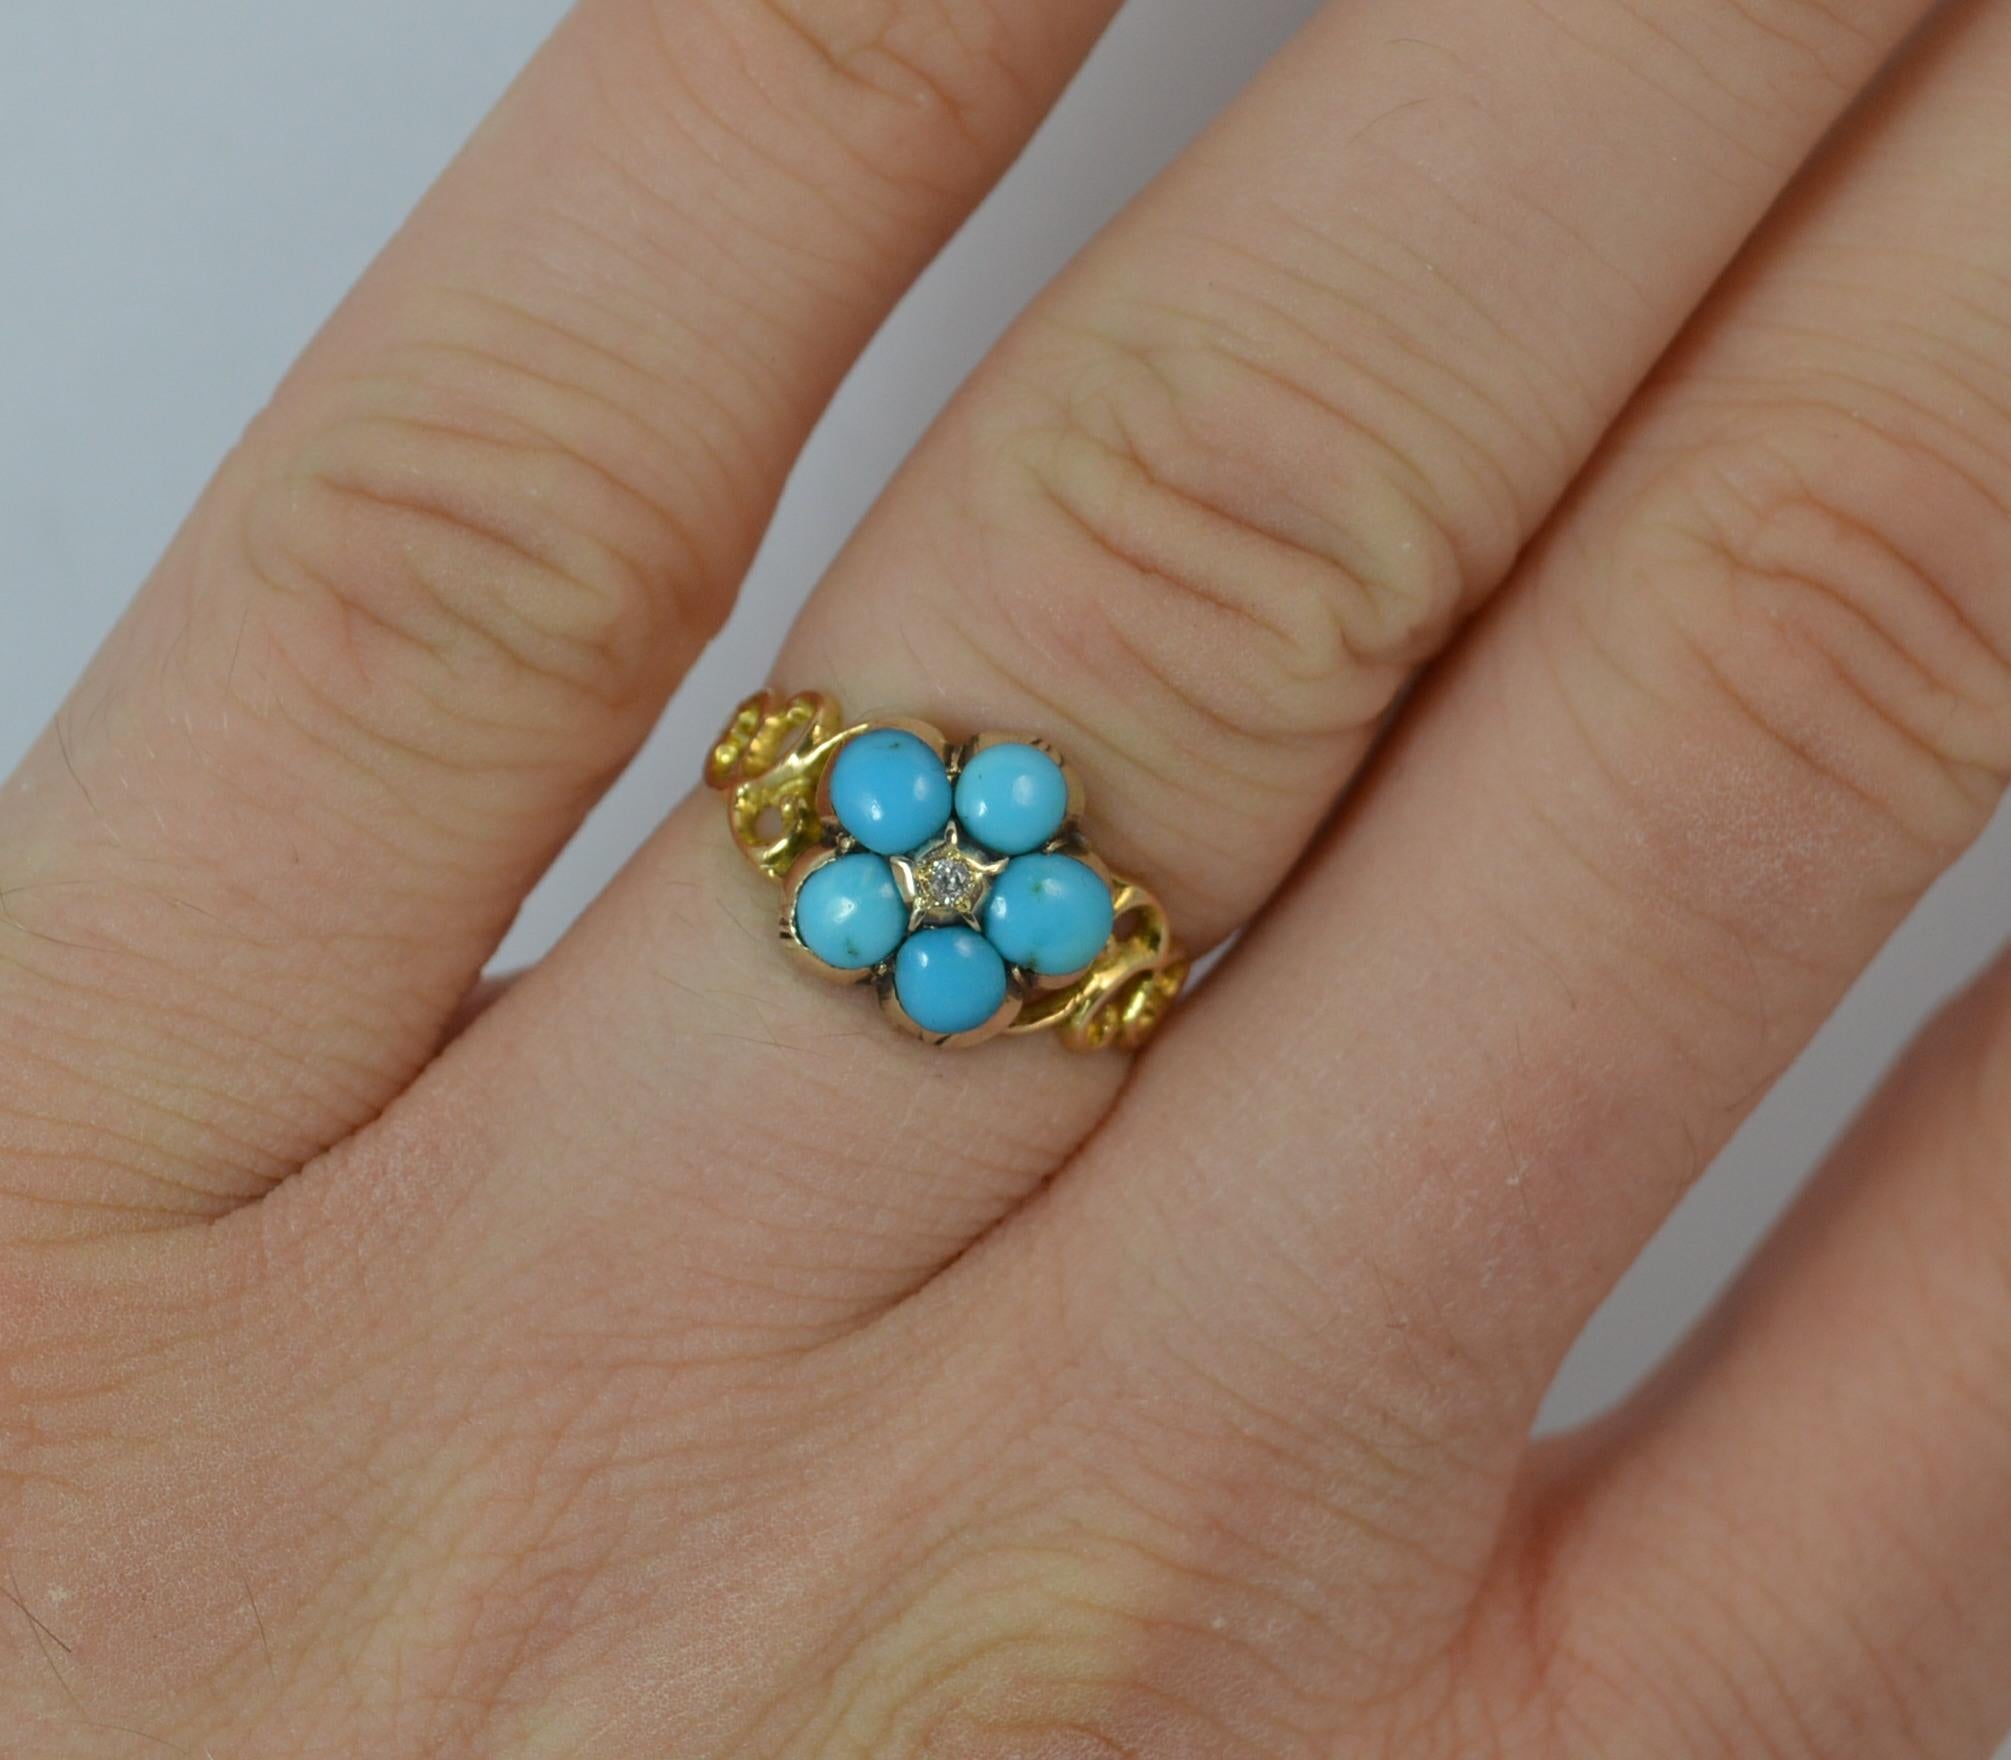 A lovely Georgian period forget me not ring.
SIZE ; L UK, 5 3/4 US
​Beautiful cluster head set with a five natural turquoise stones surrounding a small old cut diamond of floral shape. 10mm x 10mm head. Pierced floral sides.

Solid 15 carat yellow